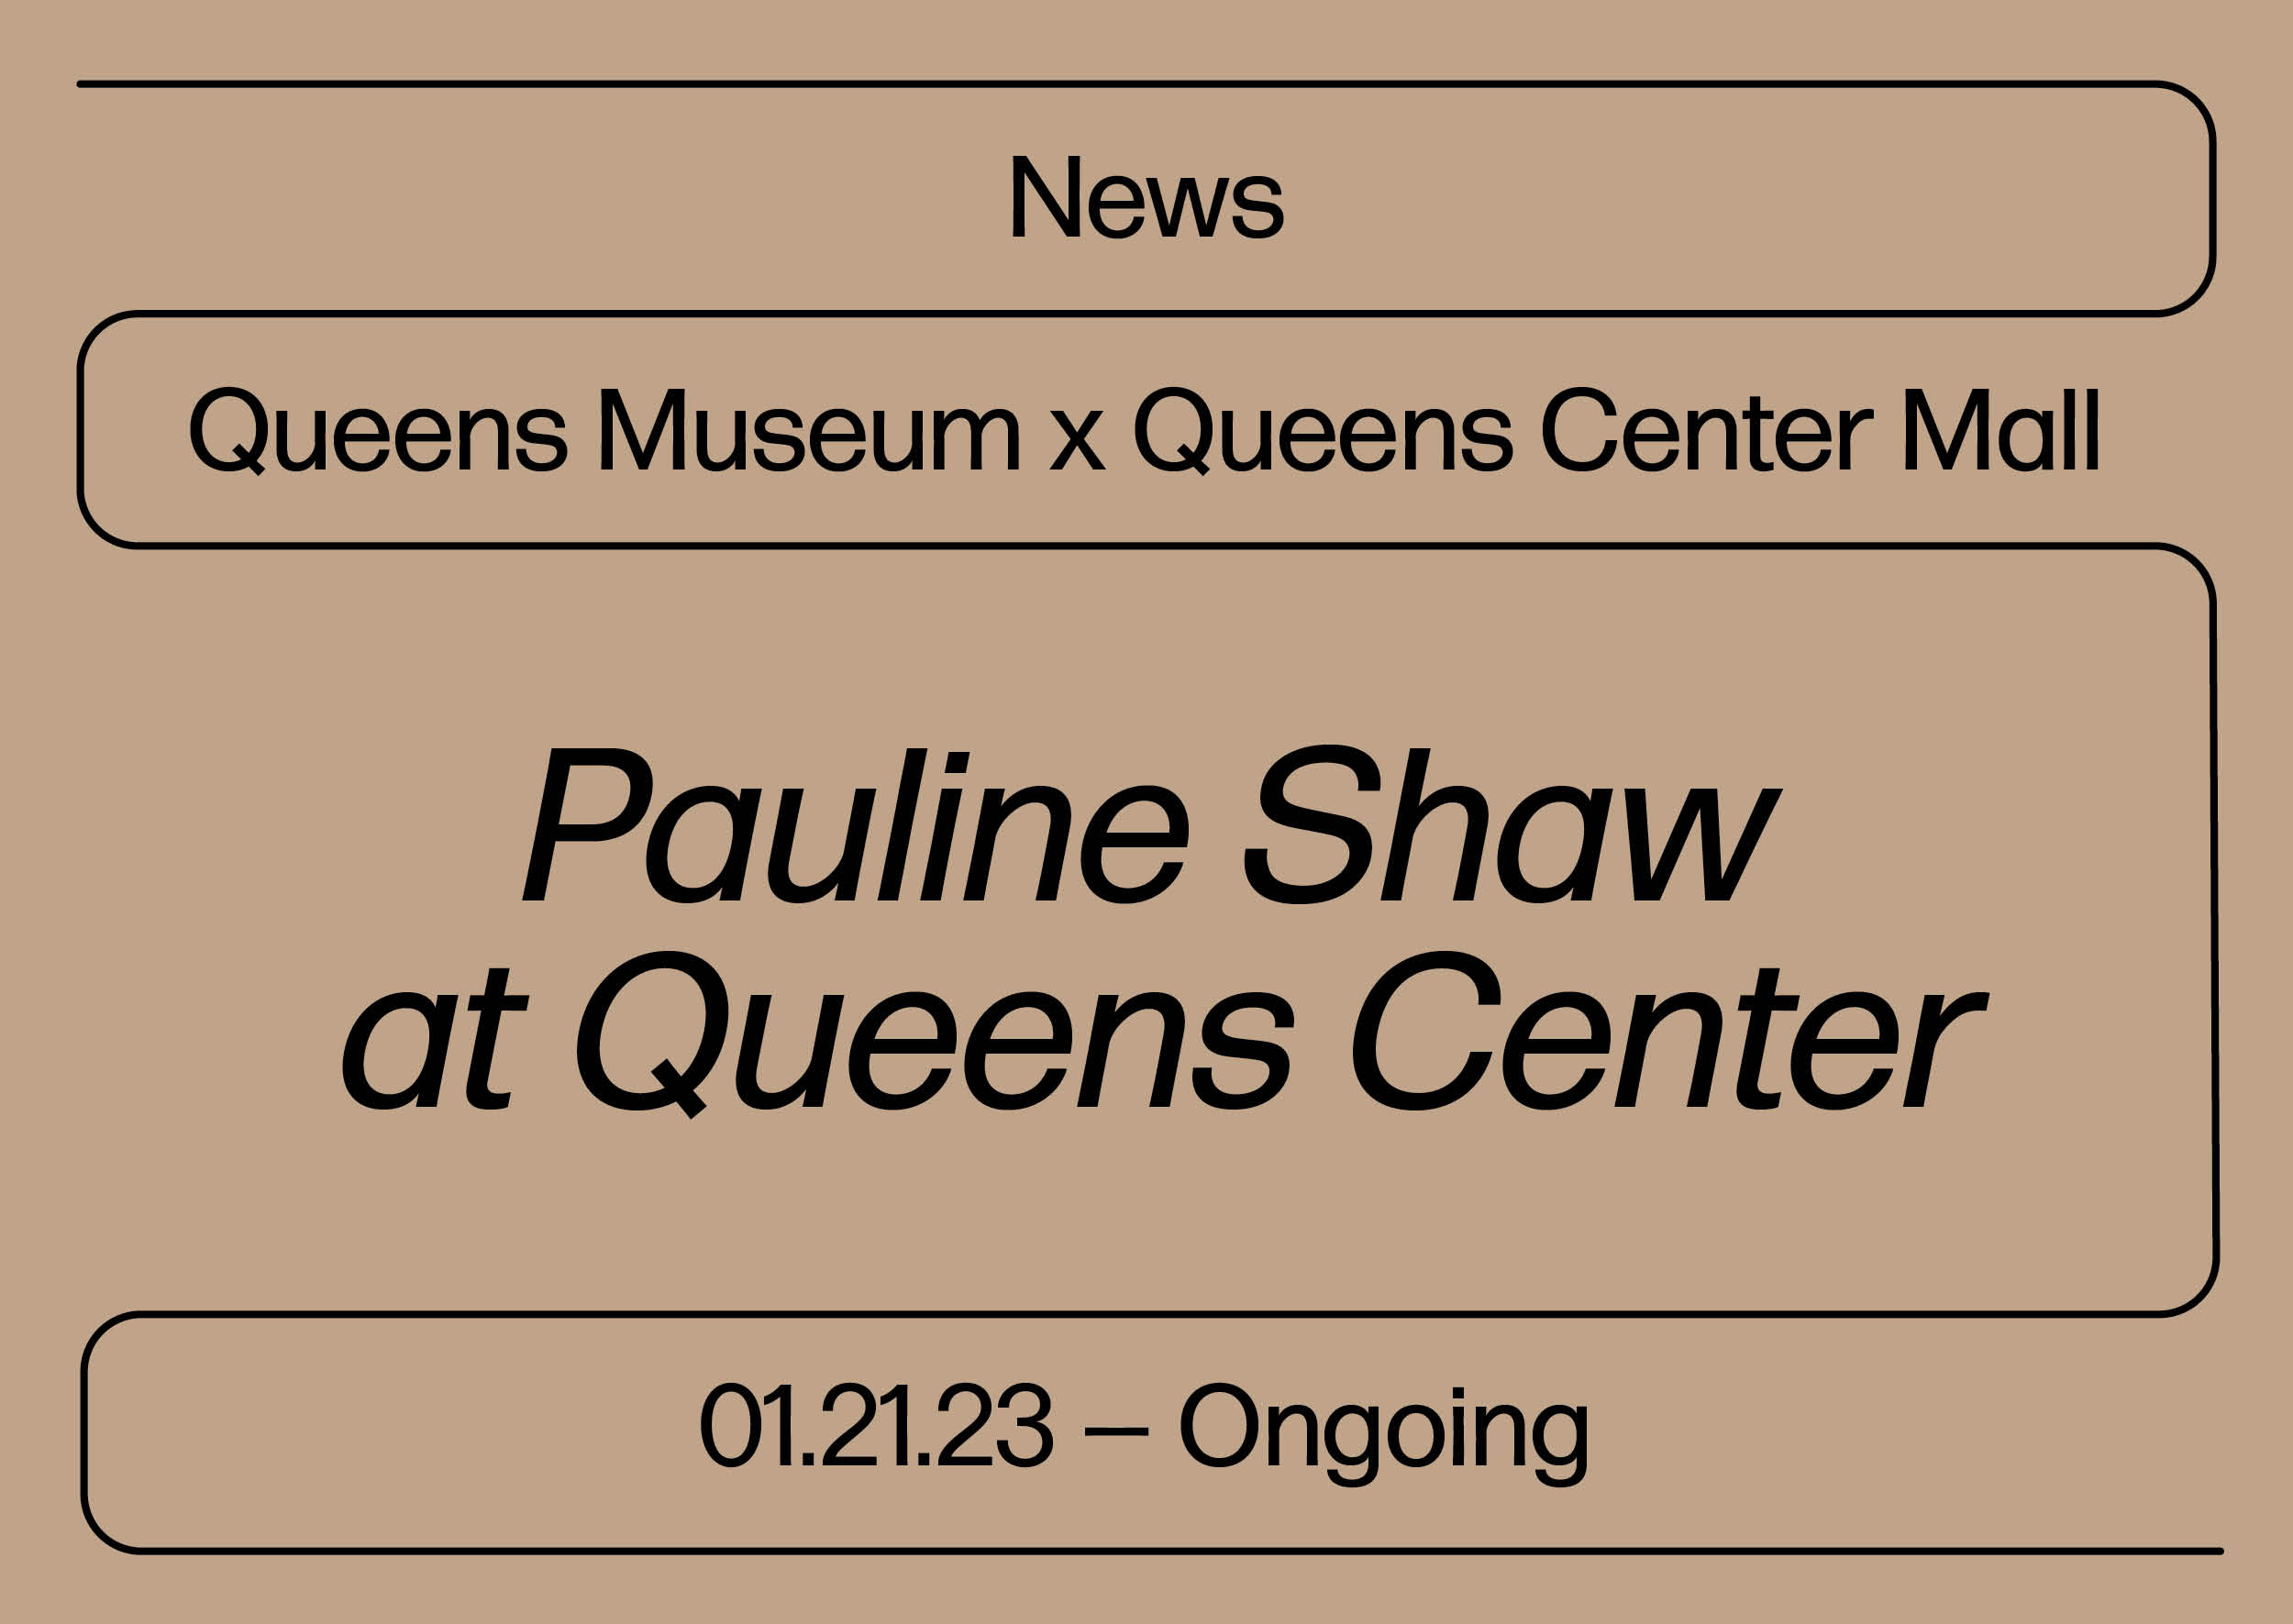 Black text on beige background that reads News, Queens Museum x Queens Center Mall, Pauline Shaw at Queens Center, Jan 21 2023 and ongoing